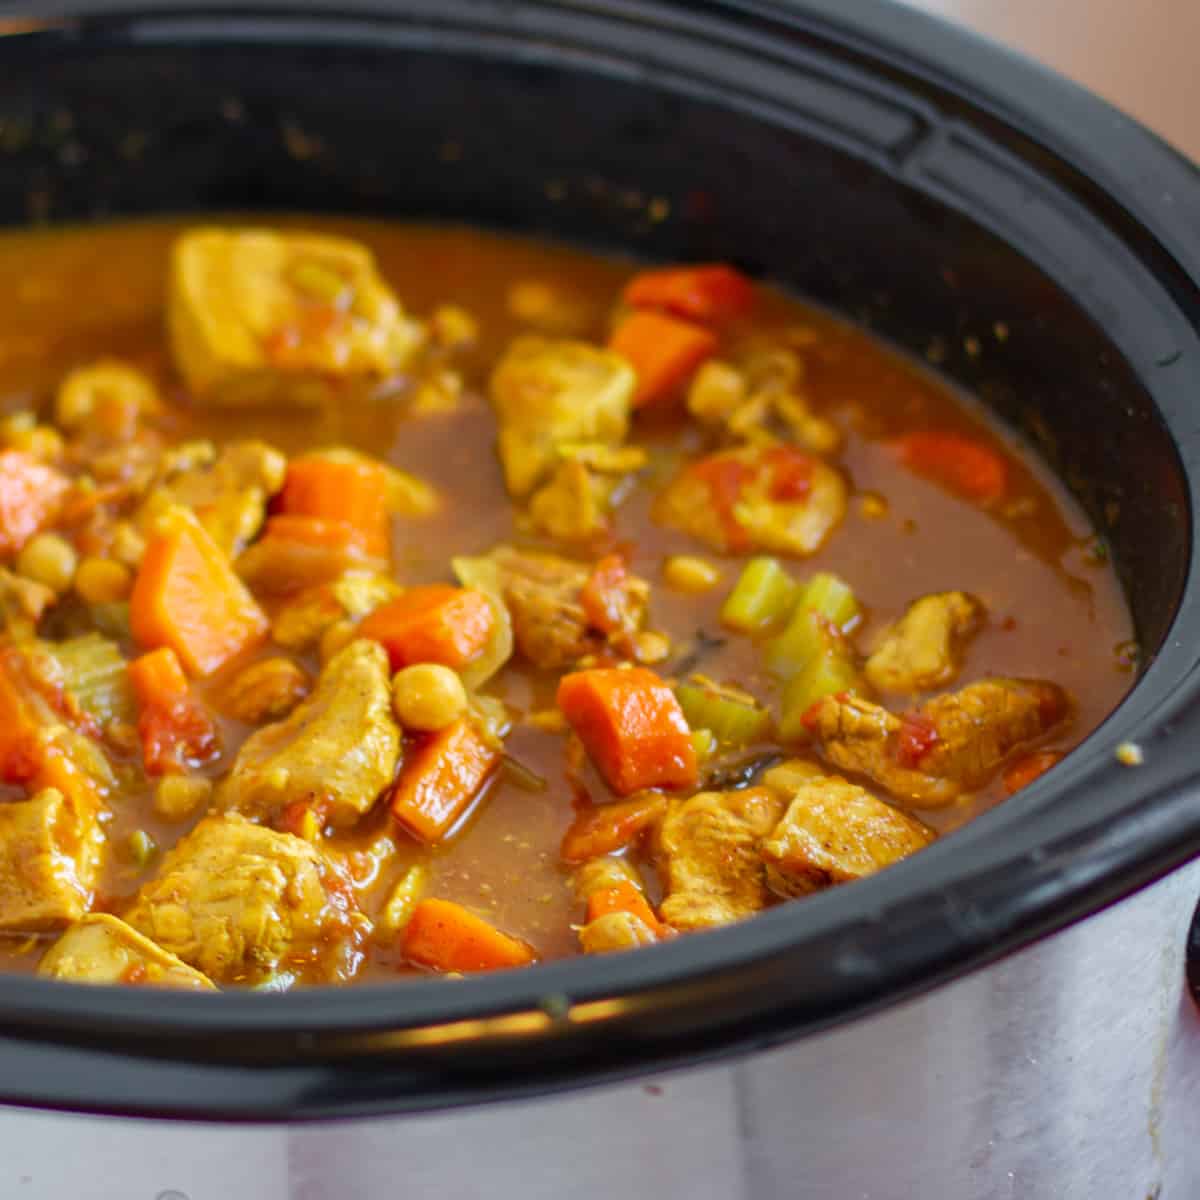 Tagine in a slow cooker that has finished cooking and ready to serve.